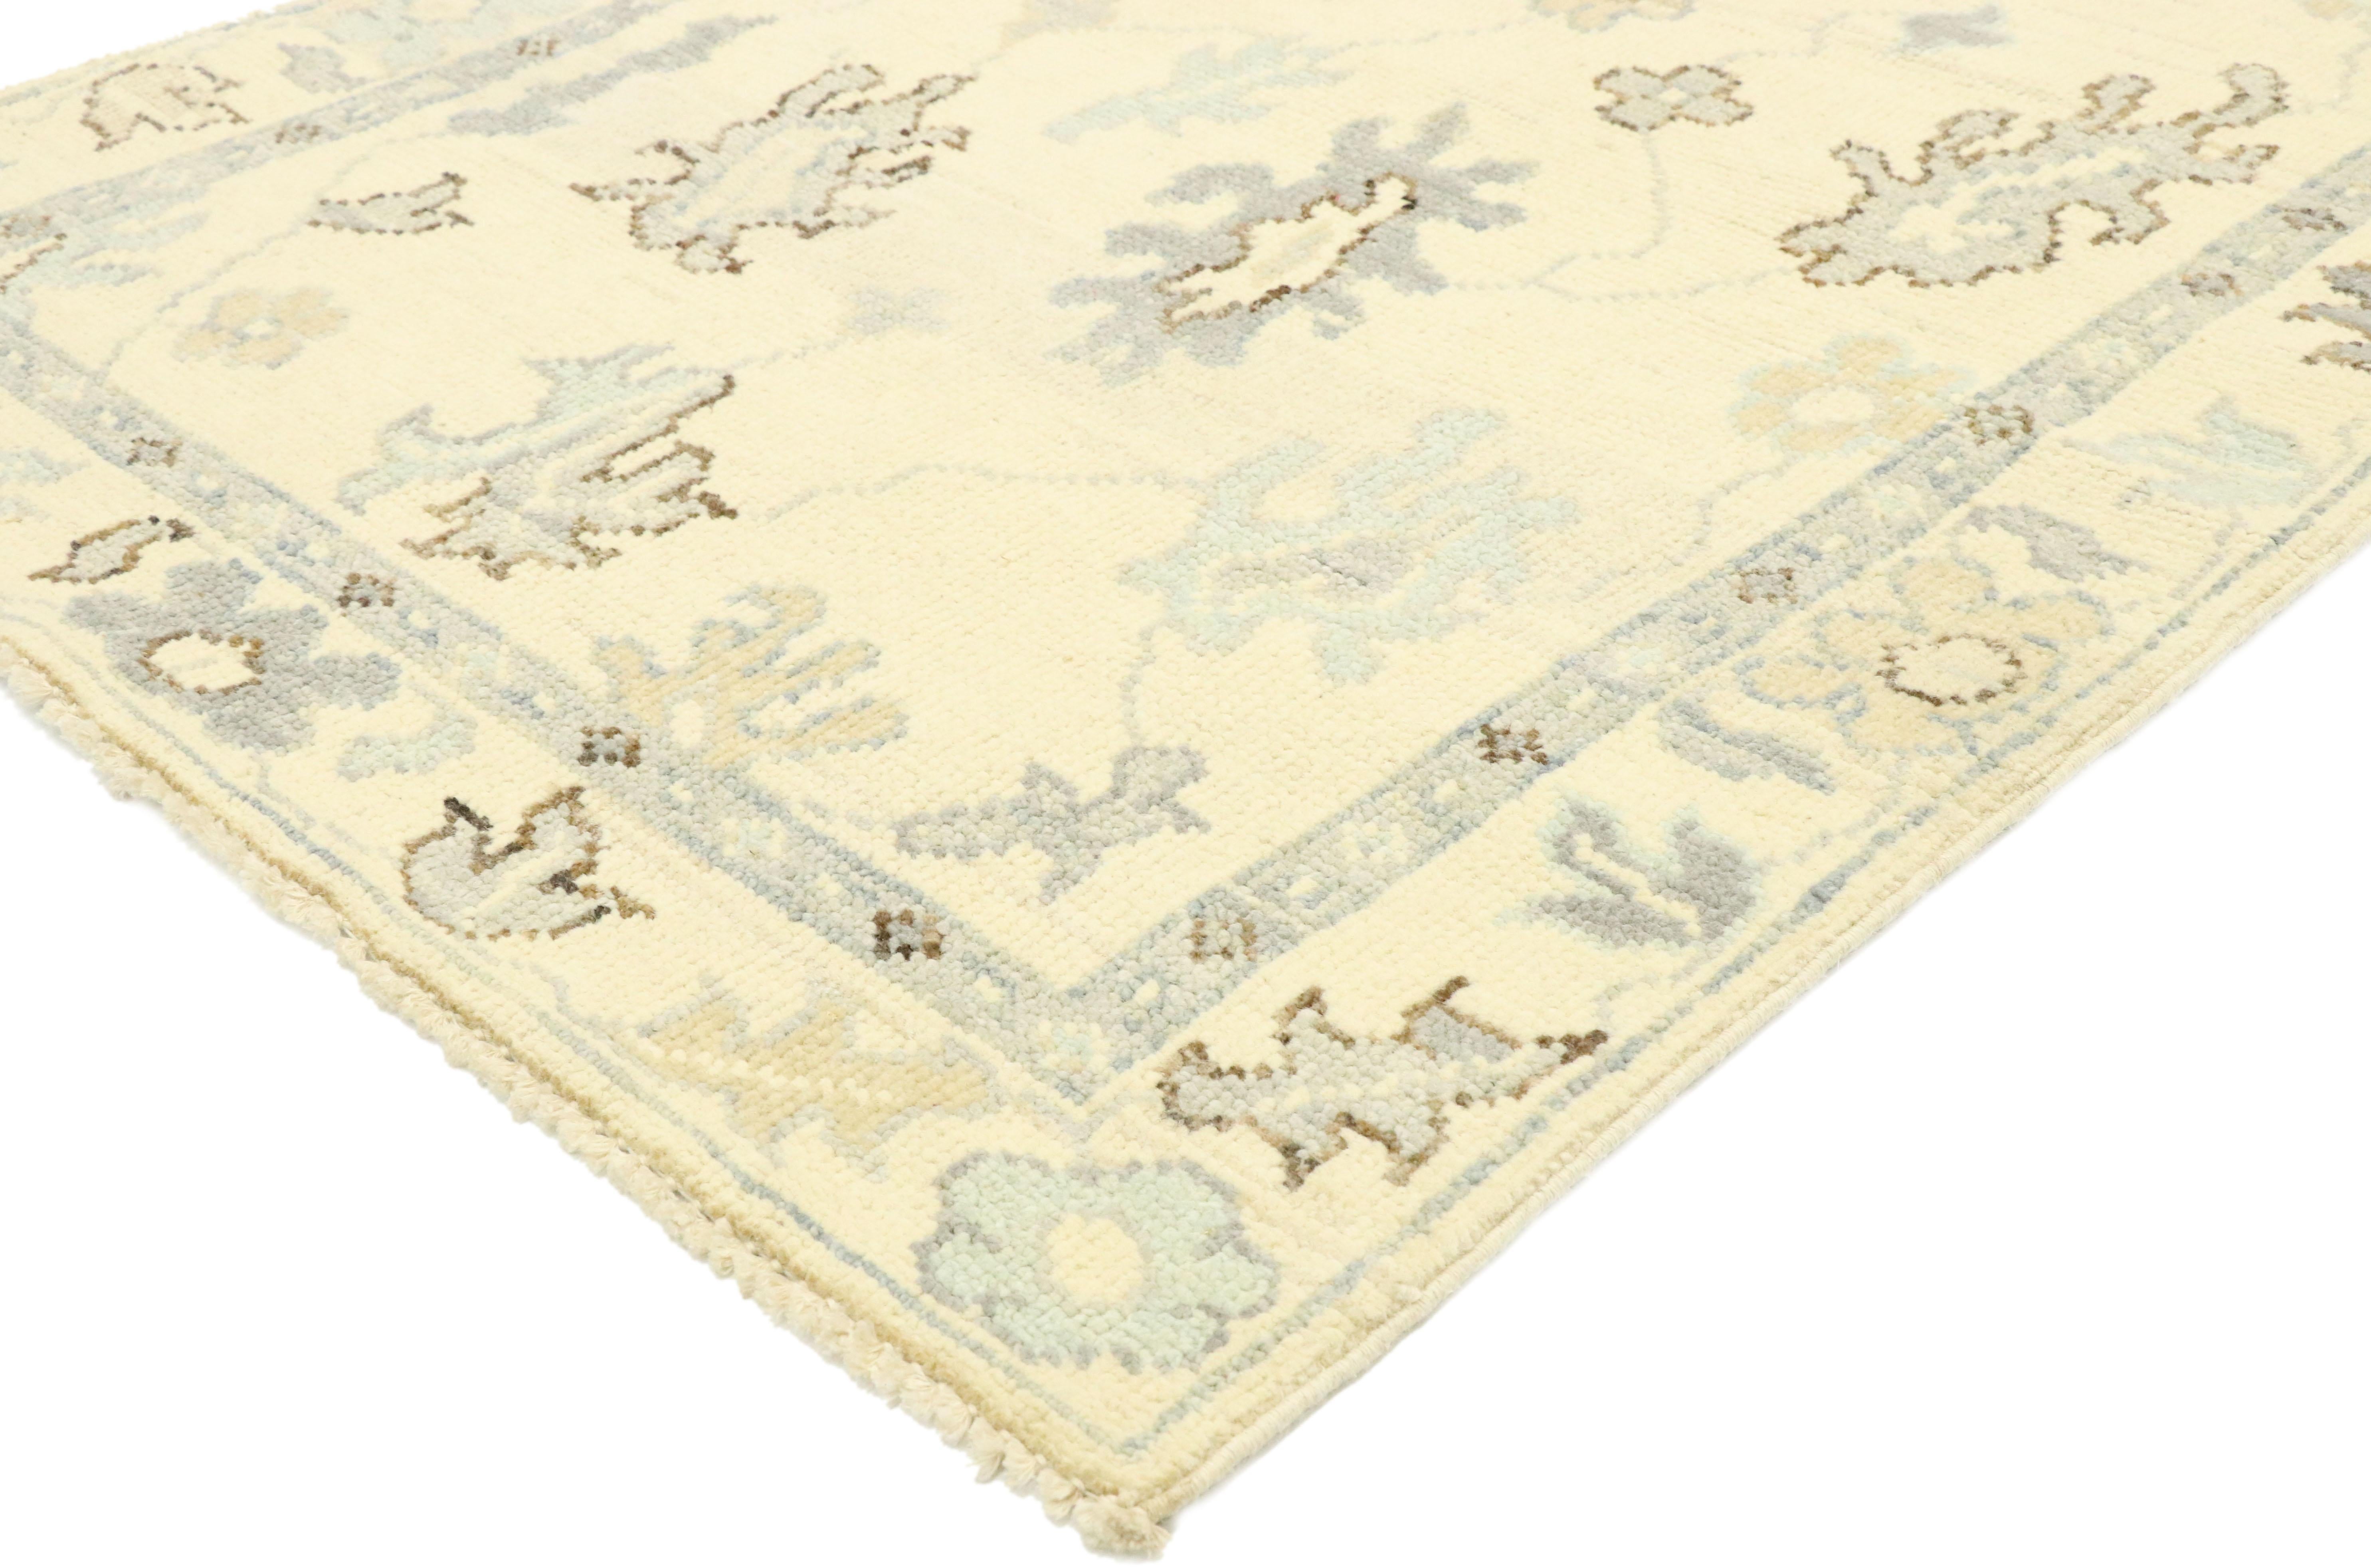 80592 New Contemporary Oushak Accent rug with Modern Transitional style. Blending elements from the modern world with light and airy colors, this hand knotted wool contemporary Oushak style rug accent will boost the coziness factor in nearly any